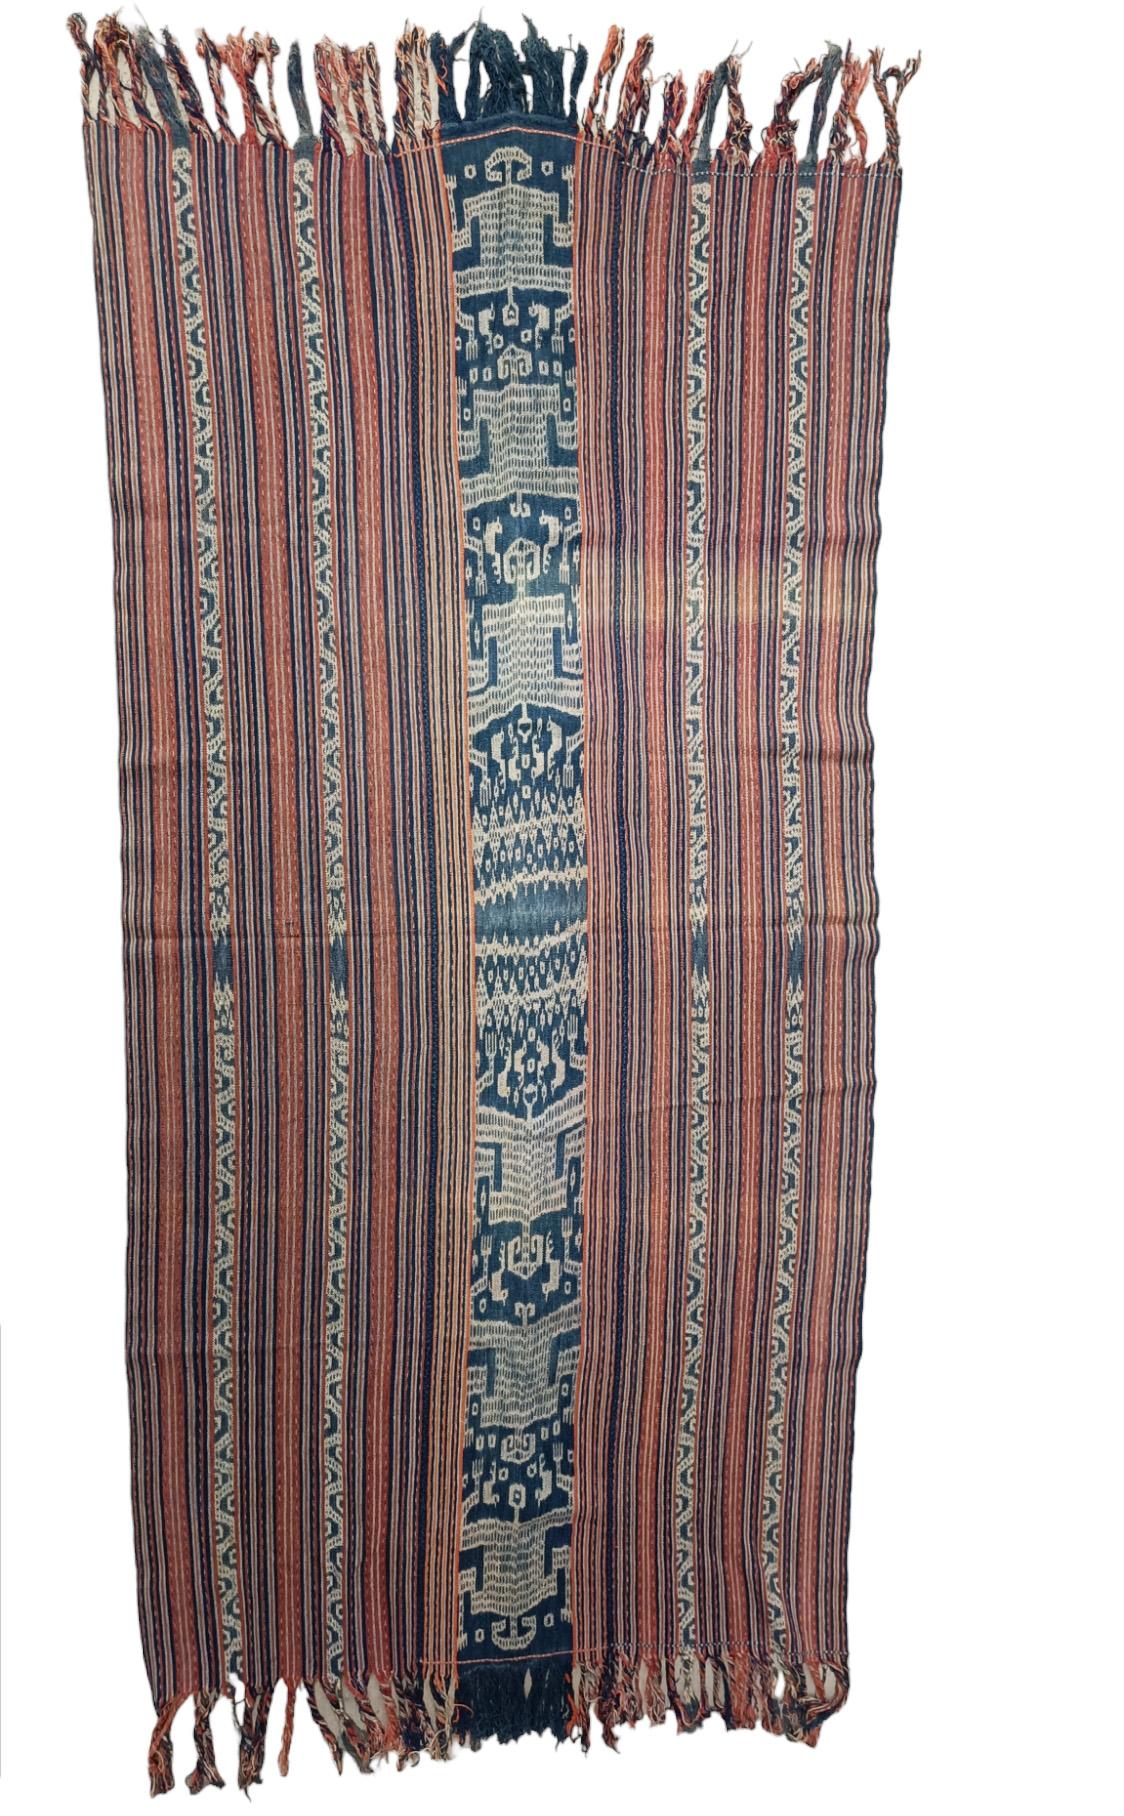 A Antique woven Ikat cloth on the island of Timor in Indonesia made using hand spun natural dyed cotton yarn. 

Comprising of 2 panels sewn together to form a larger cloth a technique often used in older ikat textiles from the region.
Featuring a